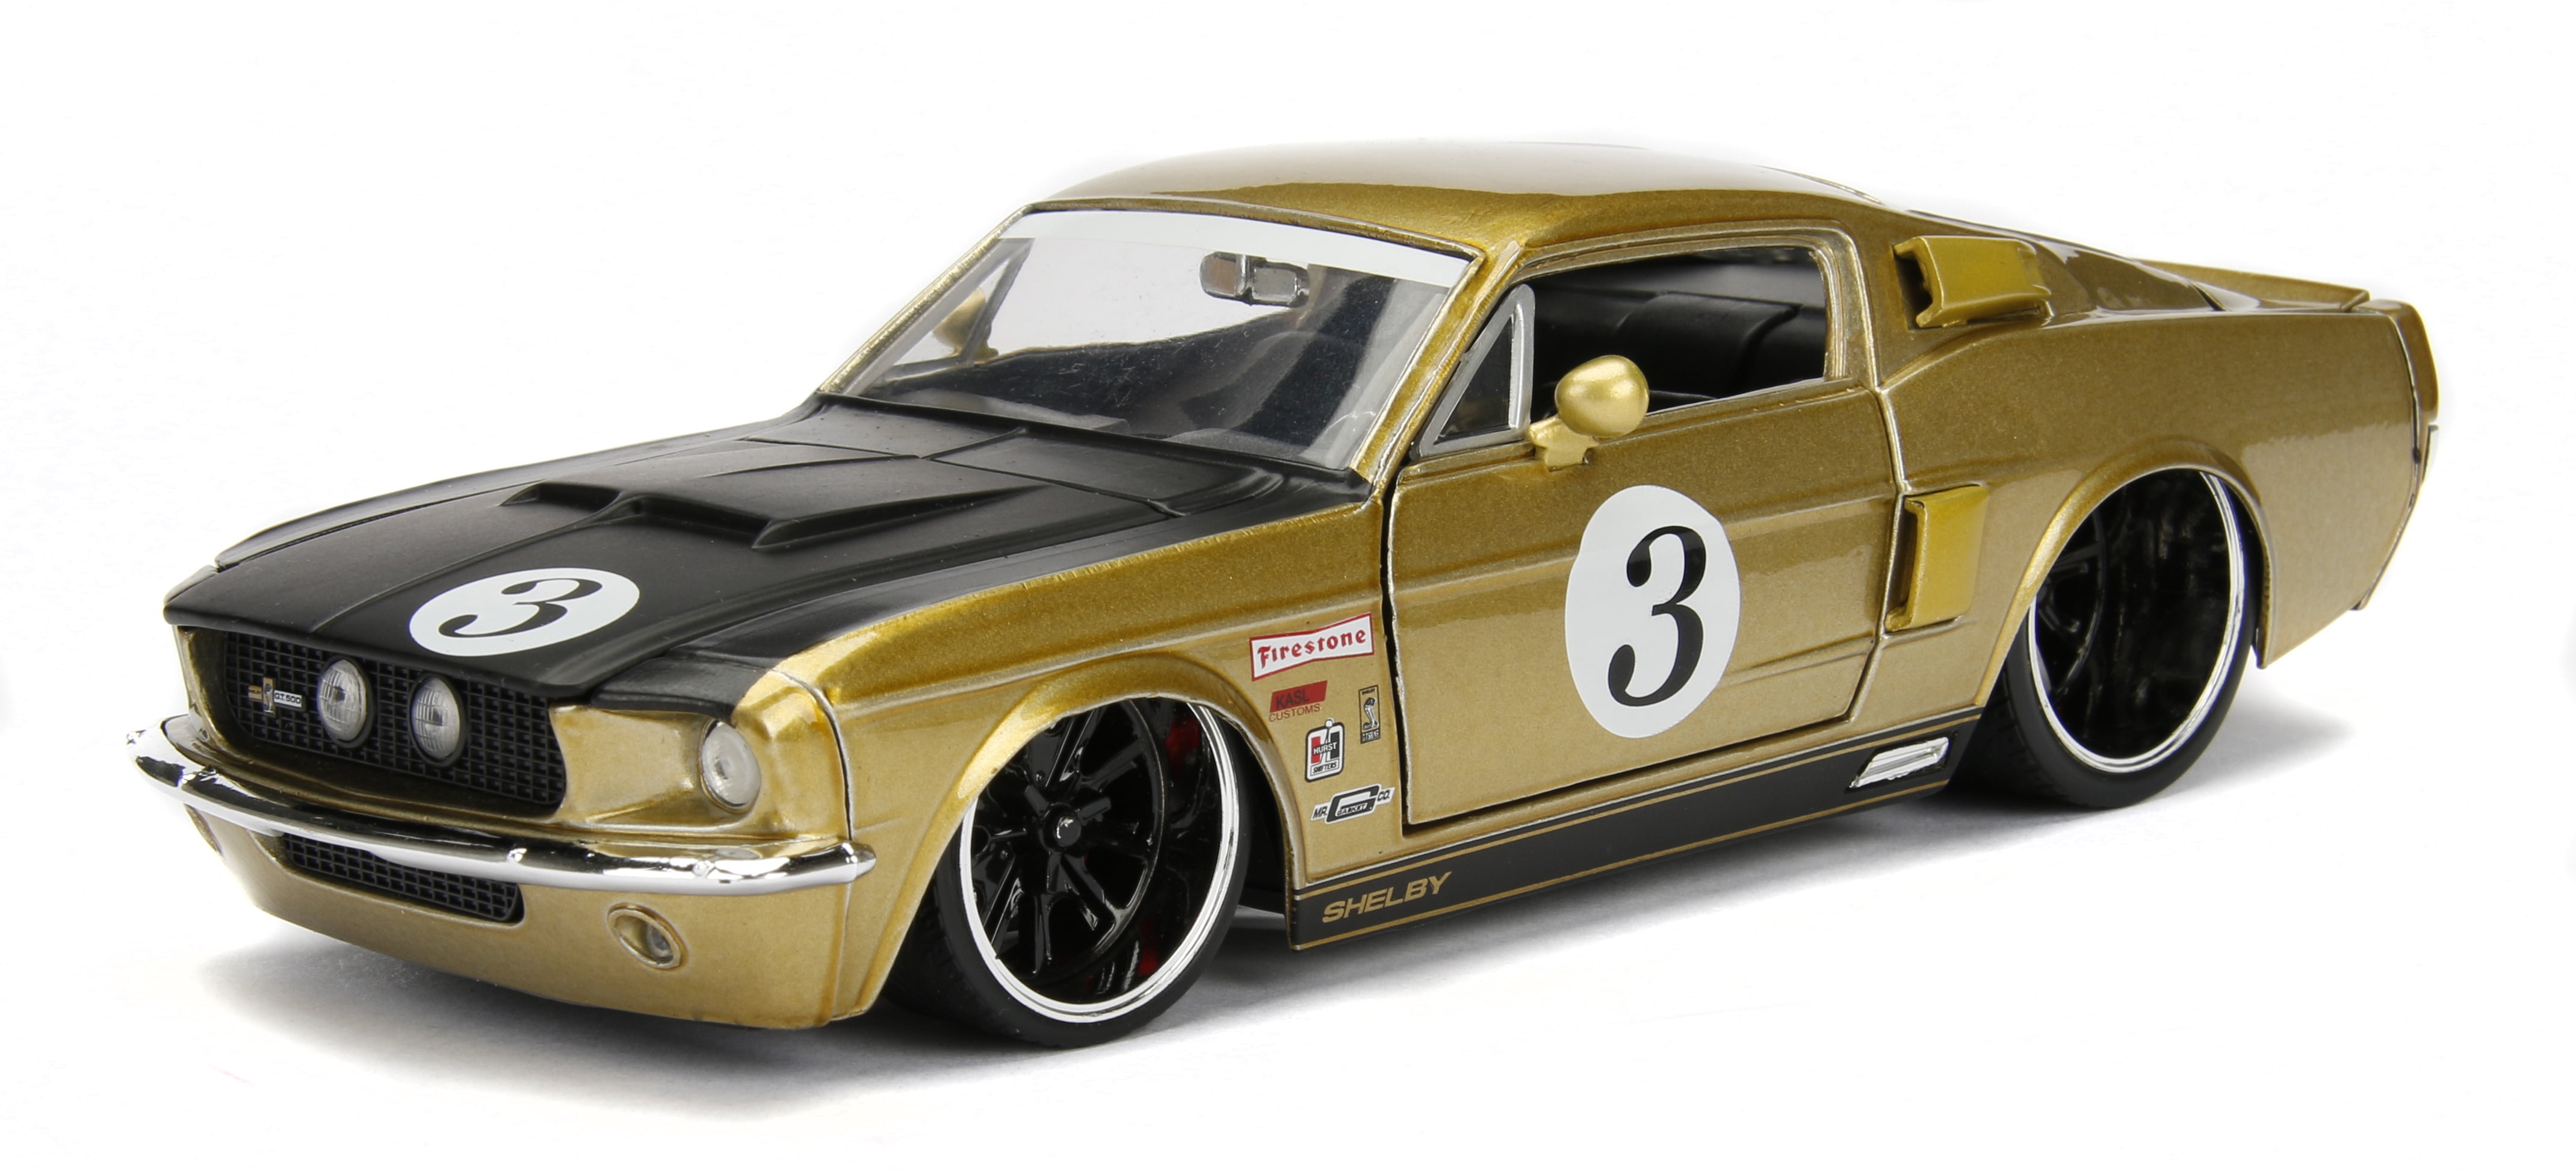 99084 1-24 1967 Ford Shelby GT-500 No. 3 Hood Big Time Muscle Diecast Model Car, Gold with Matt Black -  Jada Toys